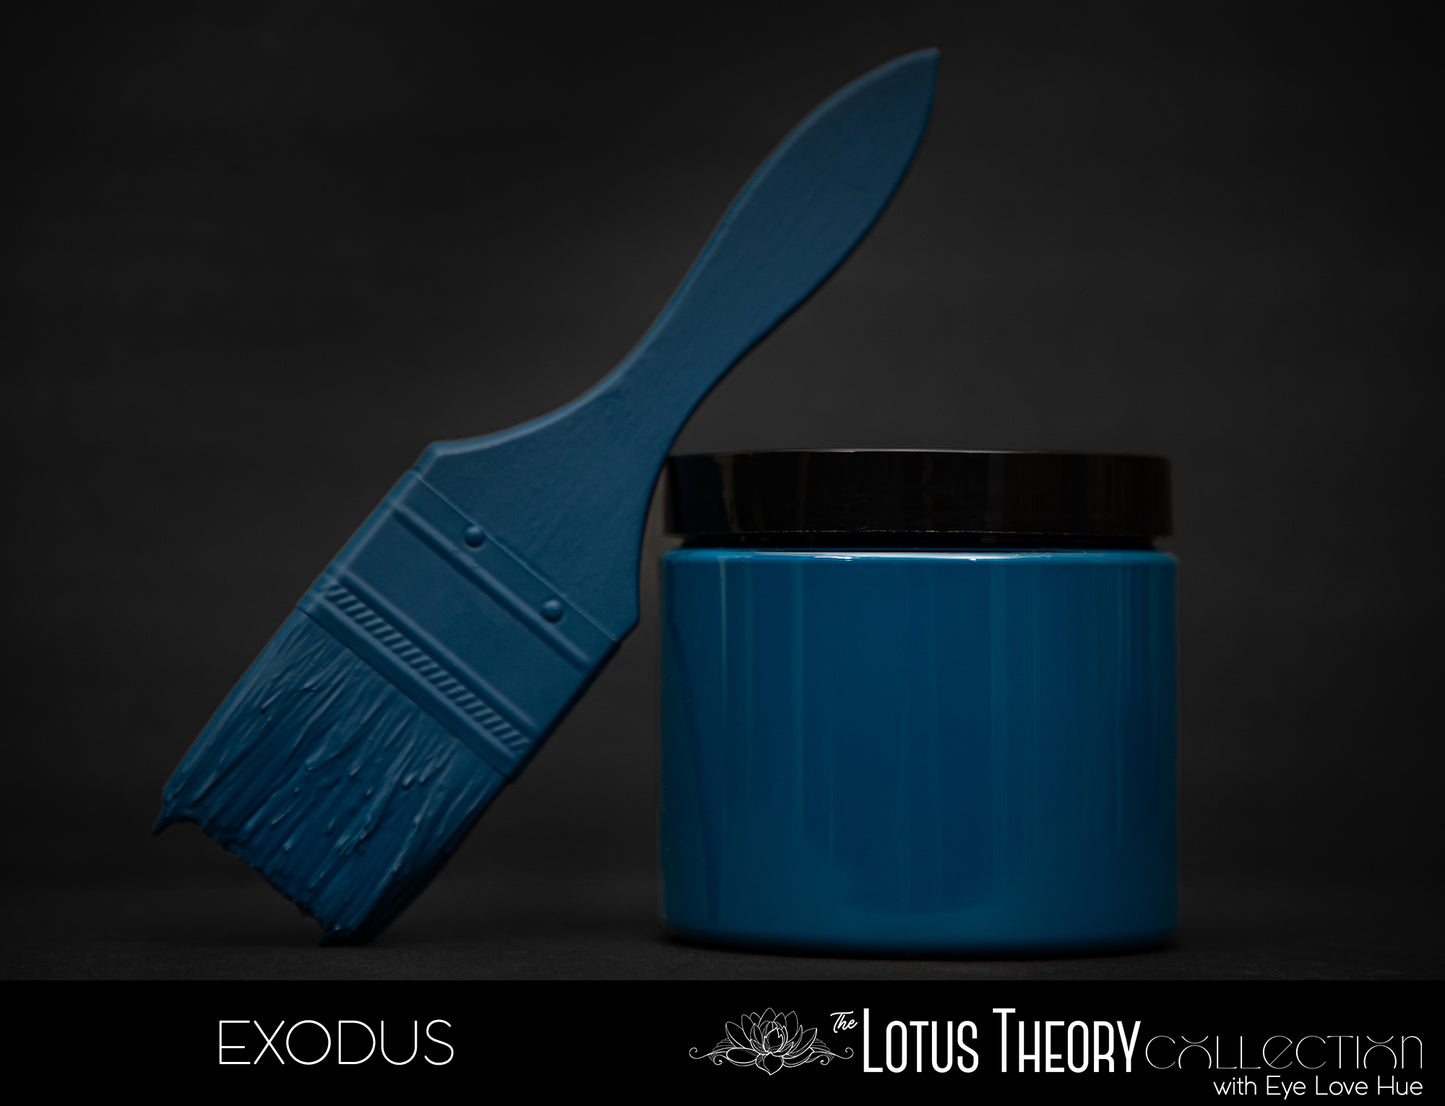 Eye Love Hue - The Lotus Theory Collection